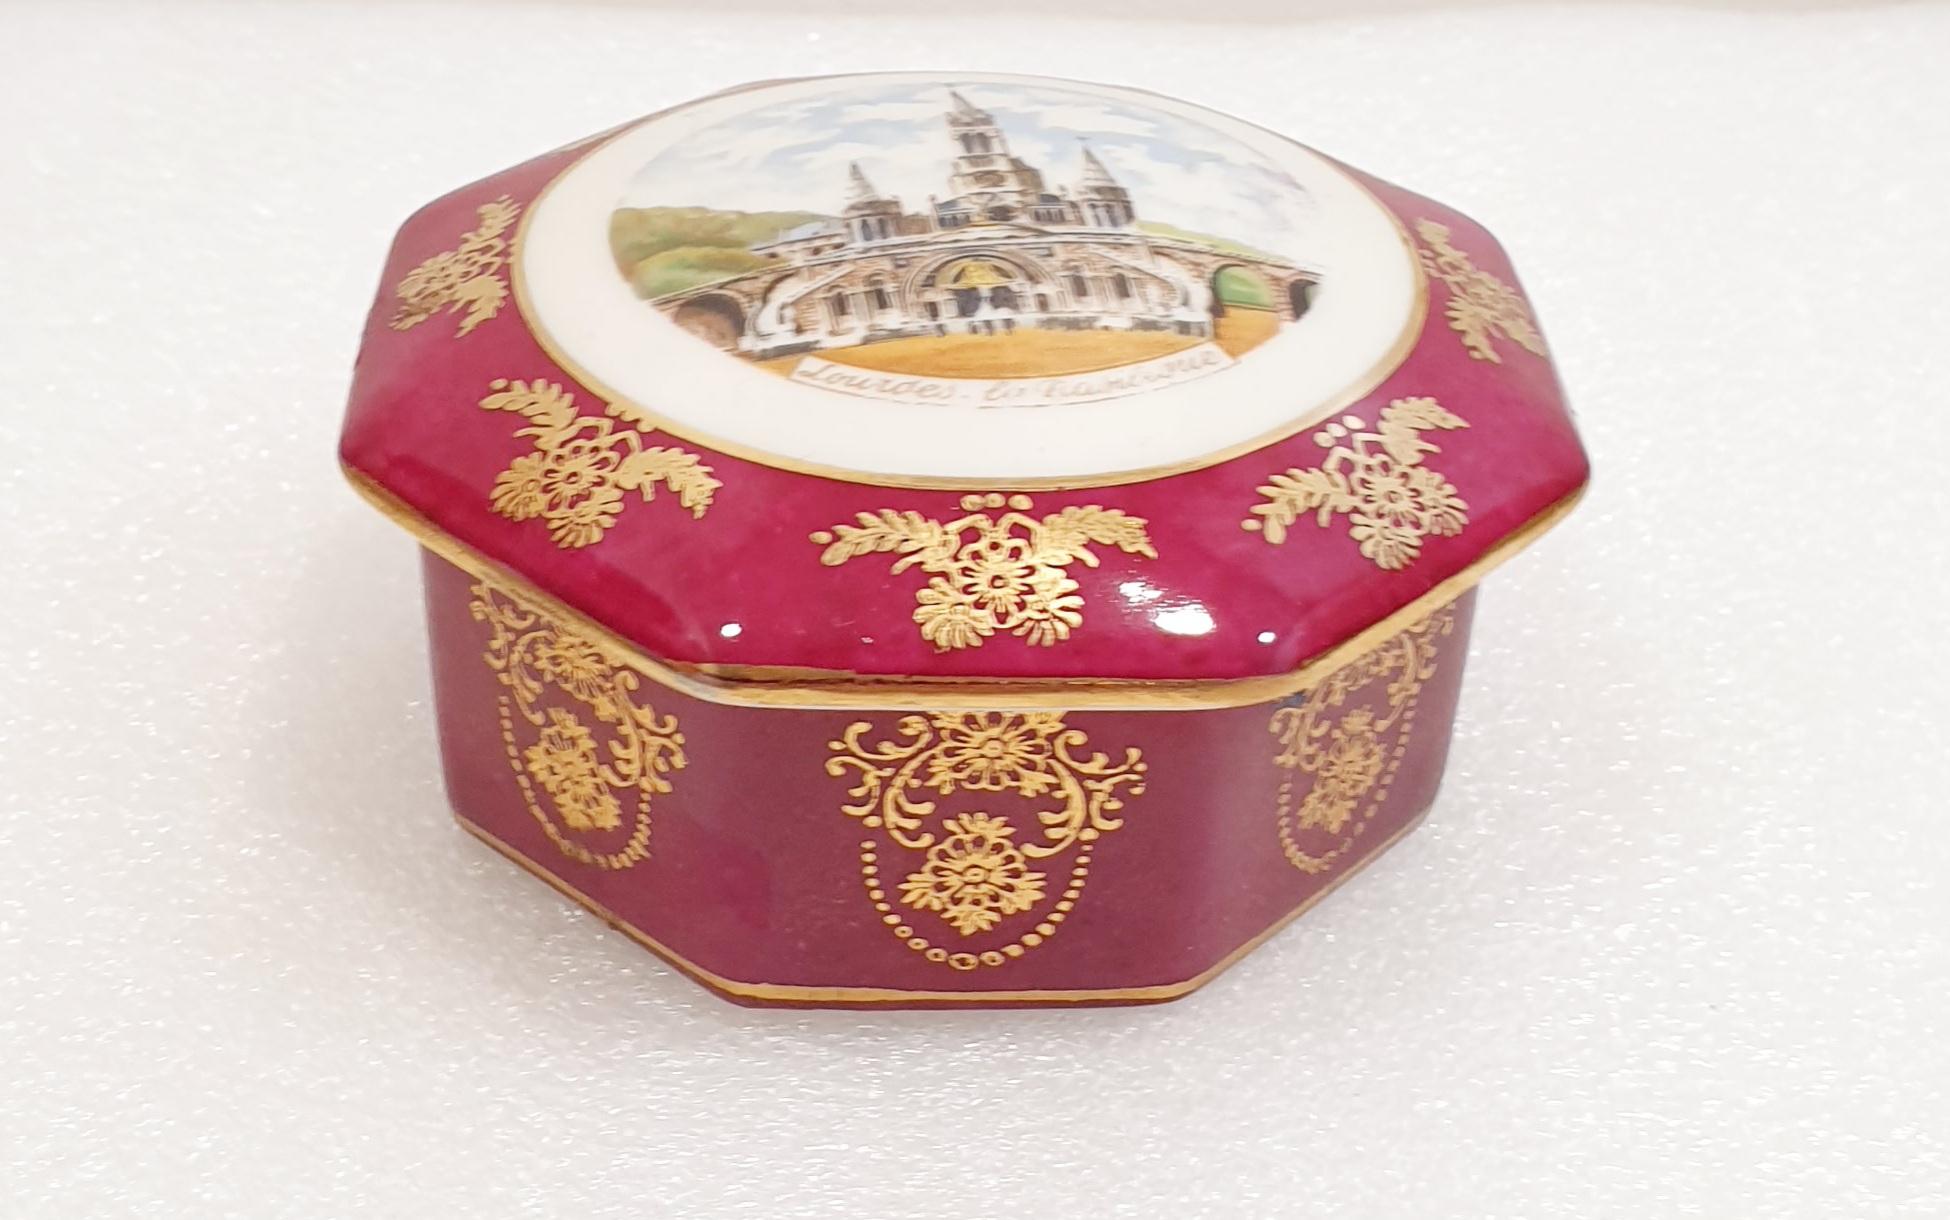 Lourdes Limoges France Vintage round porcelain garnet gold trinket box
Elegant vintage octagonal trinket jewelry box from Limoges.
Perfect gift for your special someone.
Dimensions:
Diameter 11 cm (4.33 inches)
Height 5 cm (1.96